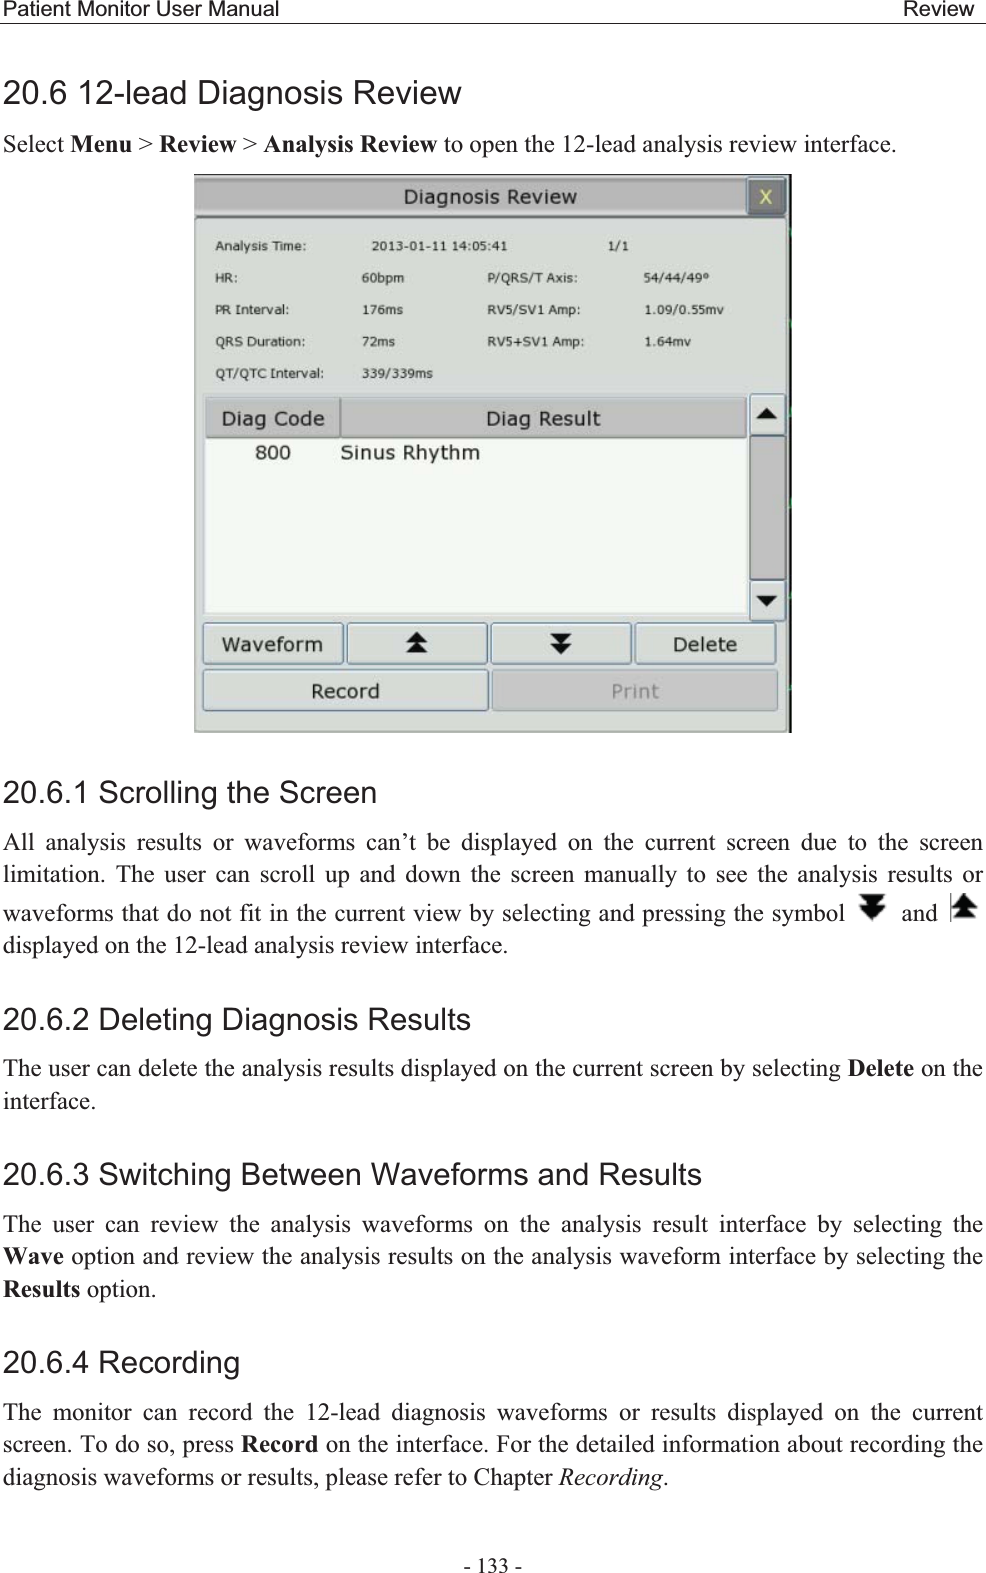 Patient Monitor User Manual                                                         Review  - 133 - 20.6 12-lead Diagnosis Review Select Menu &gt; Review &gt; Analysis Review to open the 12-lead analysis review interface.  20.6.1 Scrolling the Screen All analysis results or waveforms can’t be displayed on the current screen due to the screen limitation. The user can scroll up and down the screen manually to see the analysis results or waveforms that do not fit in the current view by selecting and pressing the symbol   and   displayed on the 12-lead analysis review interface.   20.6.2 Deleting Diagnosis Results The user can delete the analysis results displayed on the current screen by selecting Delete on the interface.  20.6.3 Switching Between Waveforms and ResultsThe user can review the analysis waveforms on the analysis result interface by selecting the Wave option and review the analysis results on the analysis waveform interface by selecting the Results option. 20.6.4 RecordingThe monitor can record the 12-lead diagnosis waveforms or results displayed on the current screen. To do so, press Record on the interface. For the detailed information about recording the diagnosis waveforms or results, please refer to Chapter Recording. 